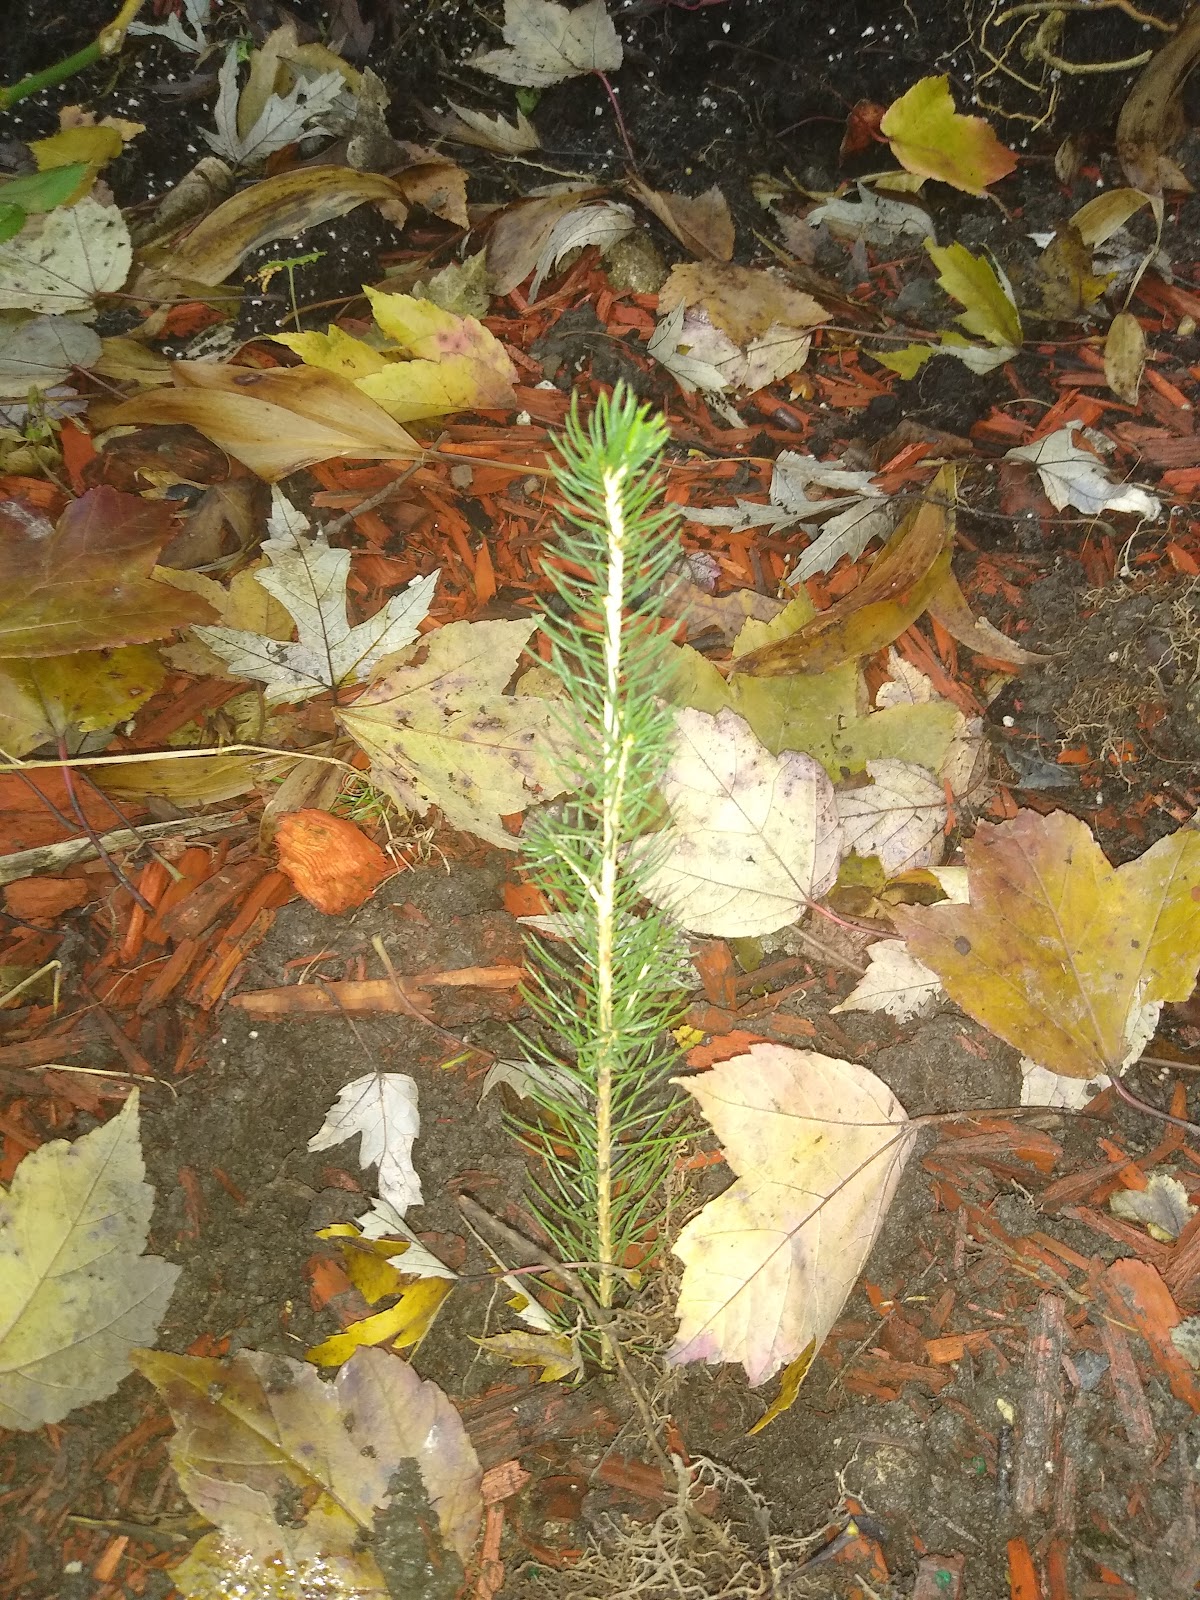 norway spruce tree in the fall